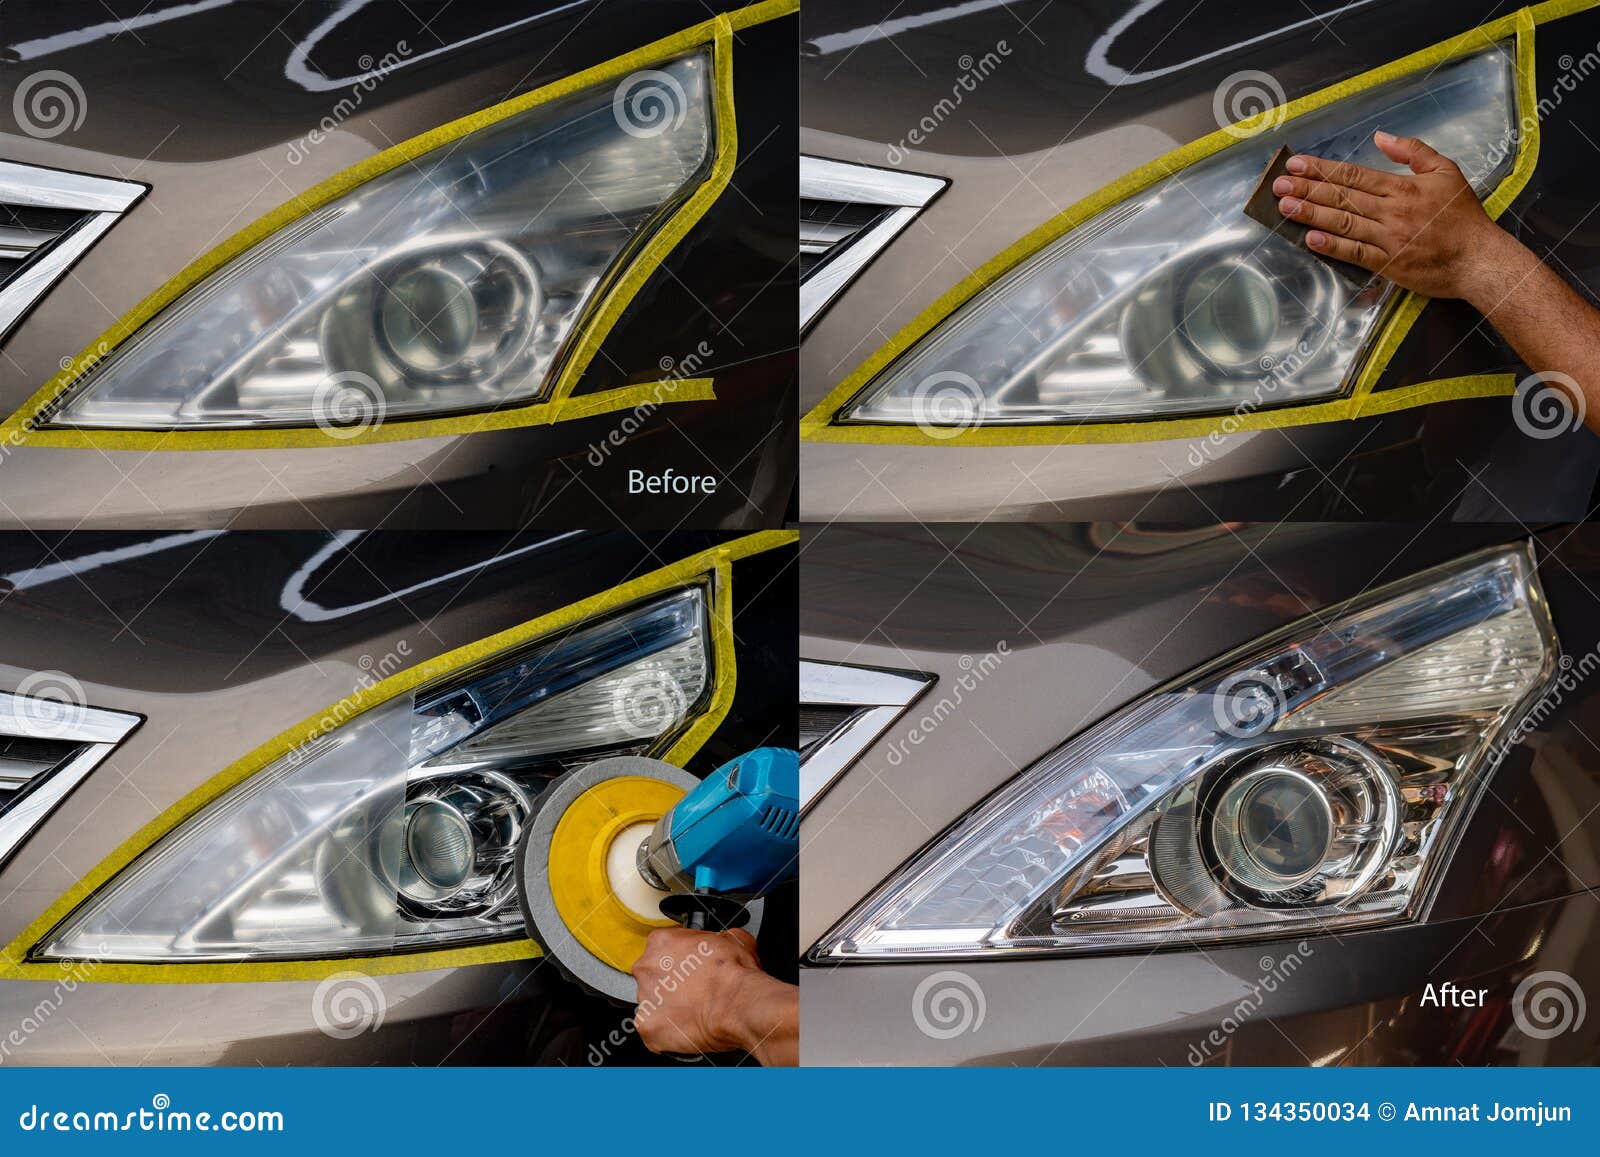 car headlights with power buffer machine at service station - a series of car care images